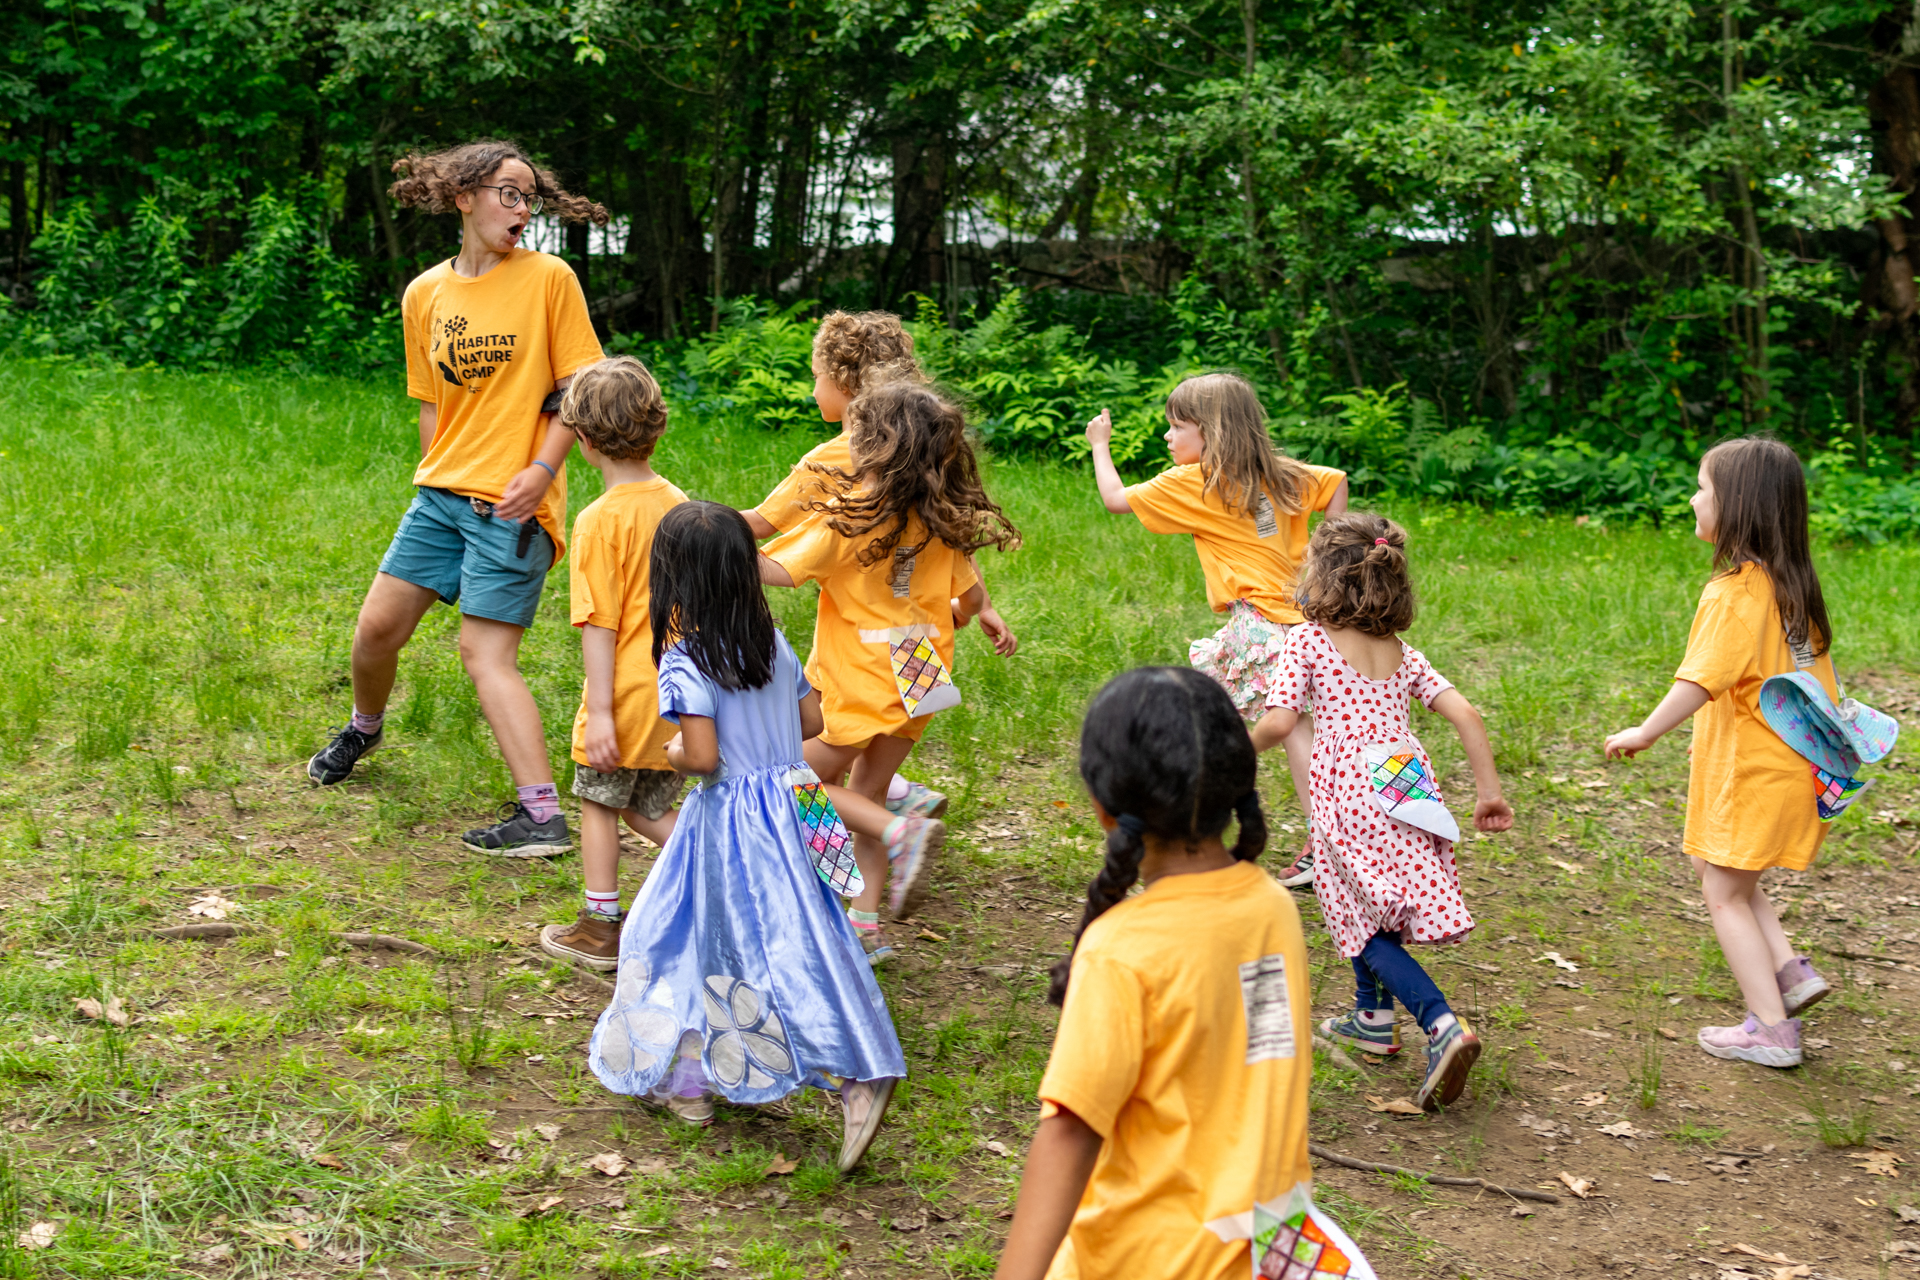 A Habitat camp counselor spins around to look at campers running up from behind who must freeze in place or lose the game